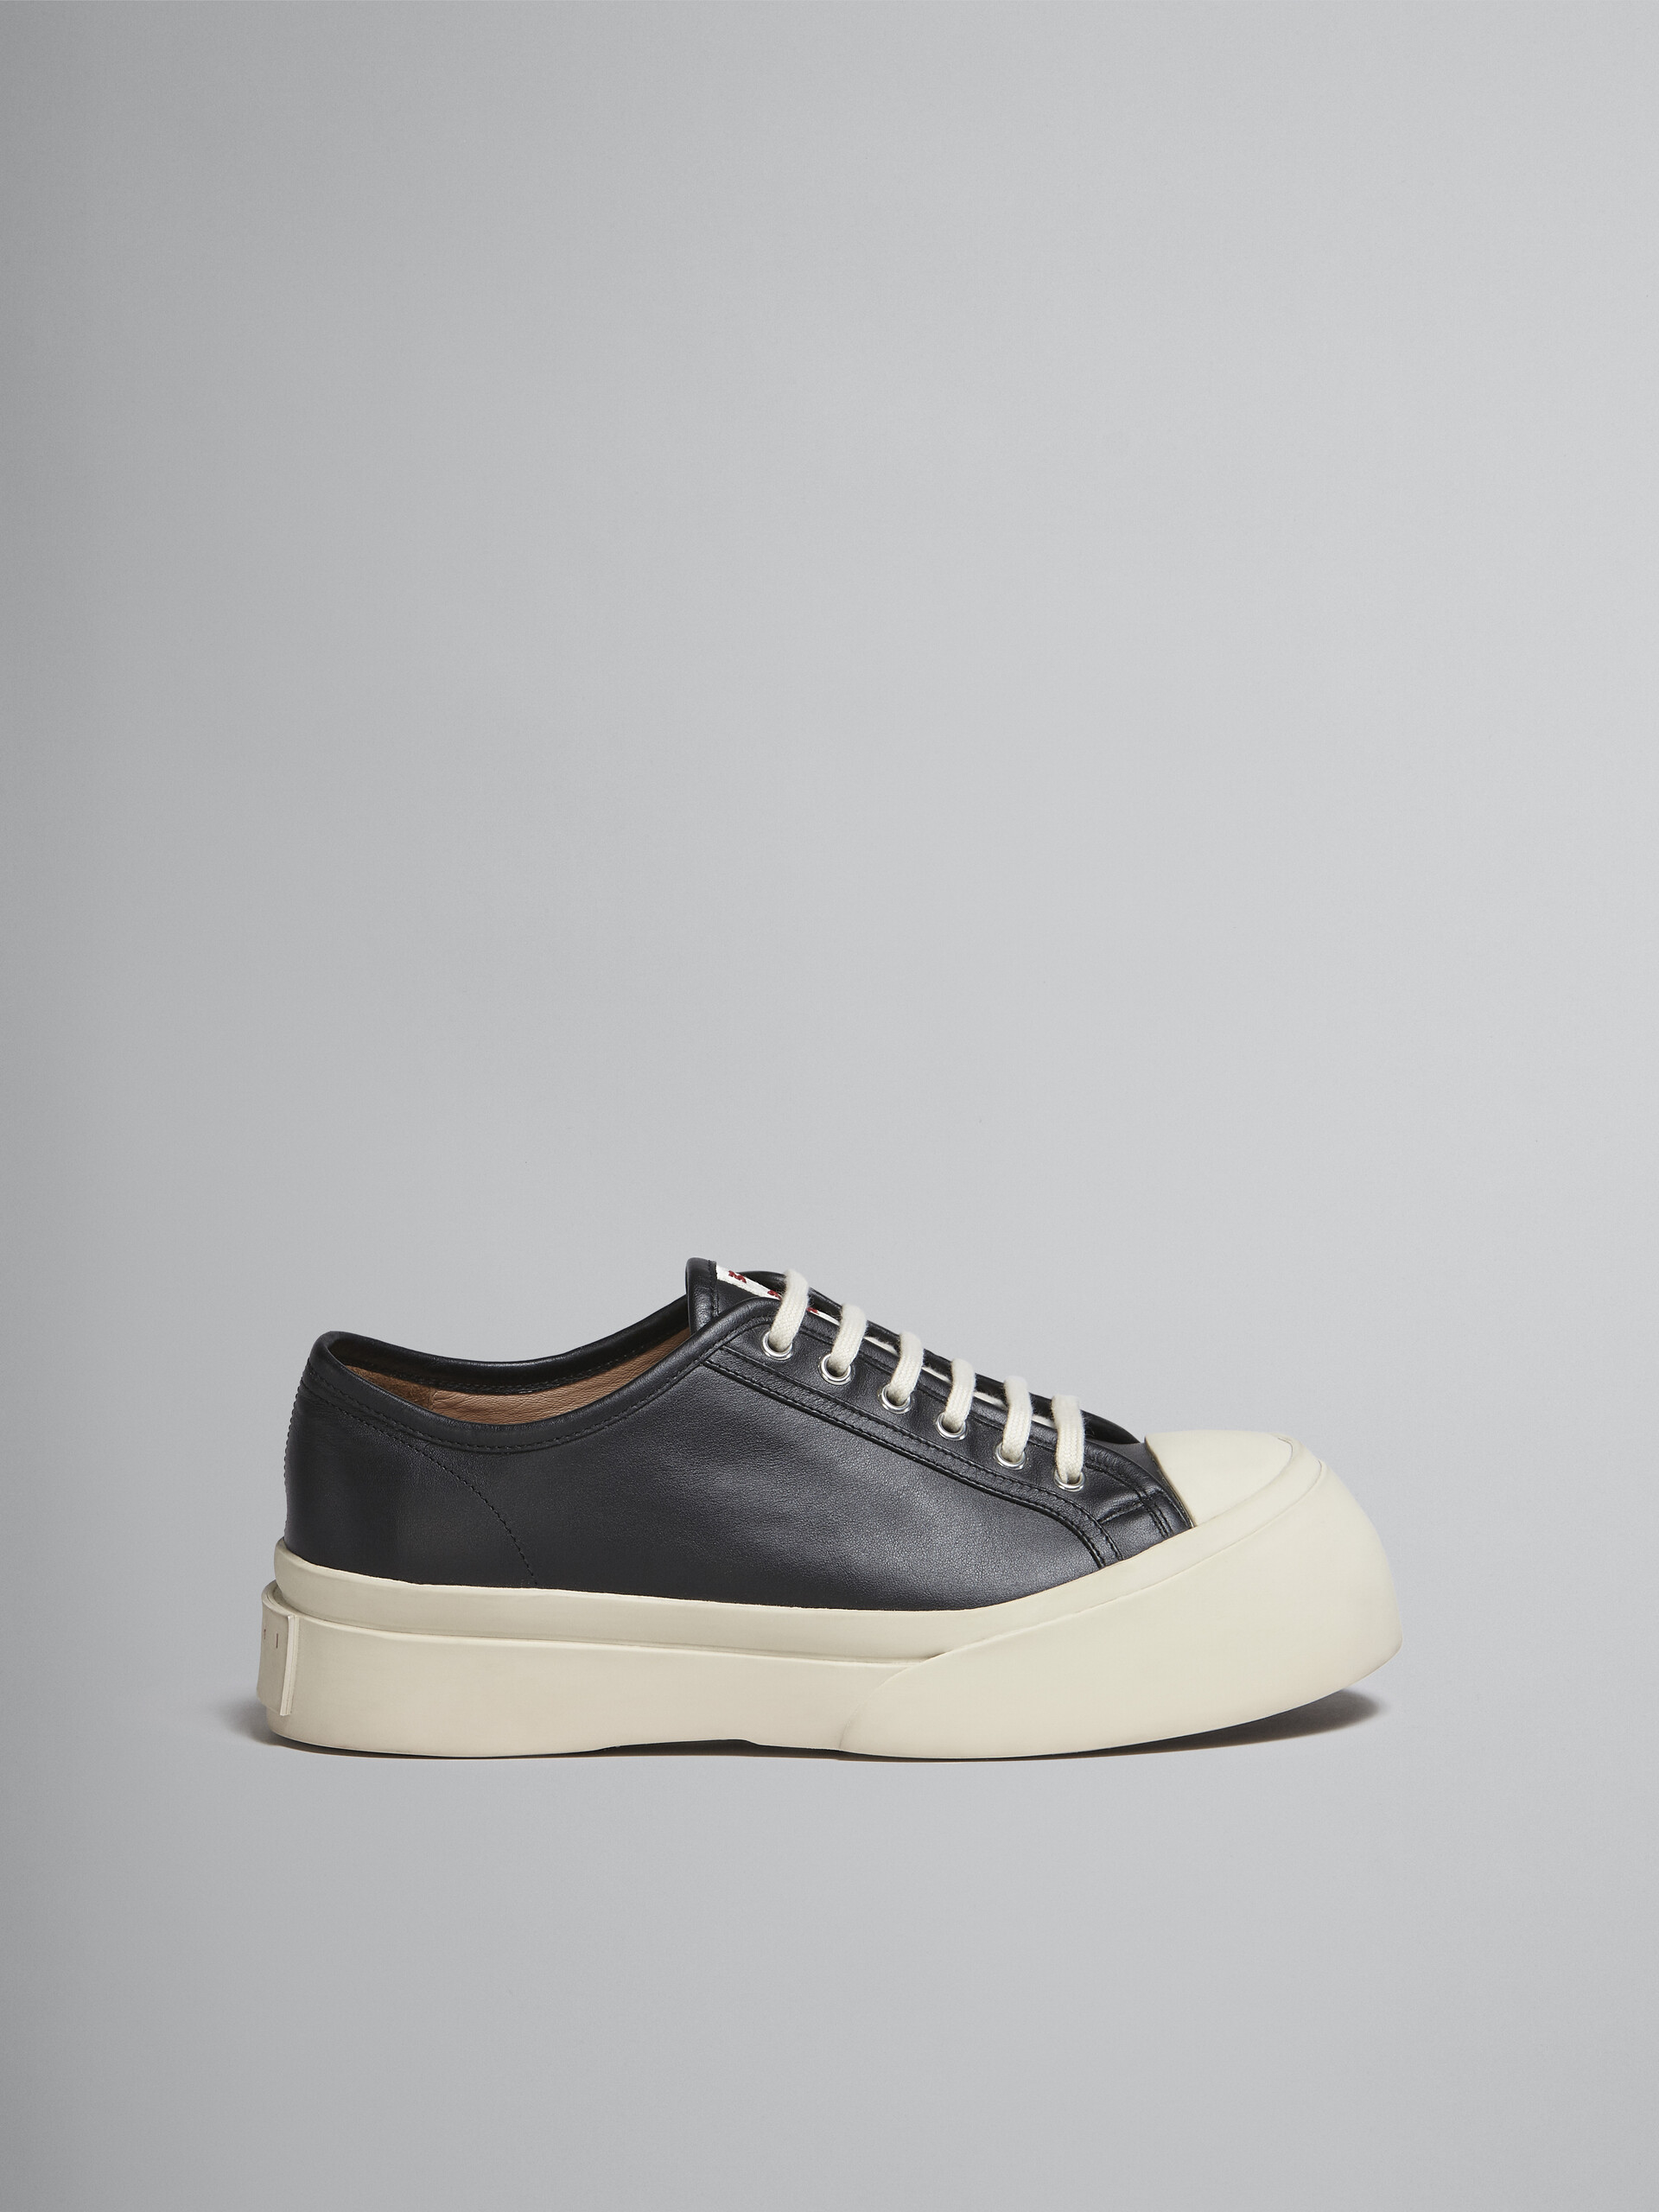 Black nappa leather PABLO lace-up sneaker